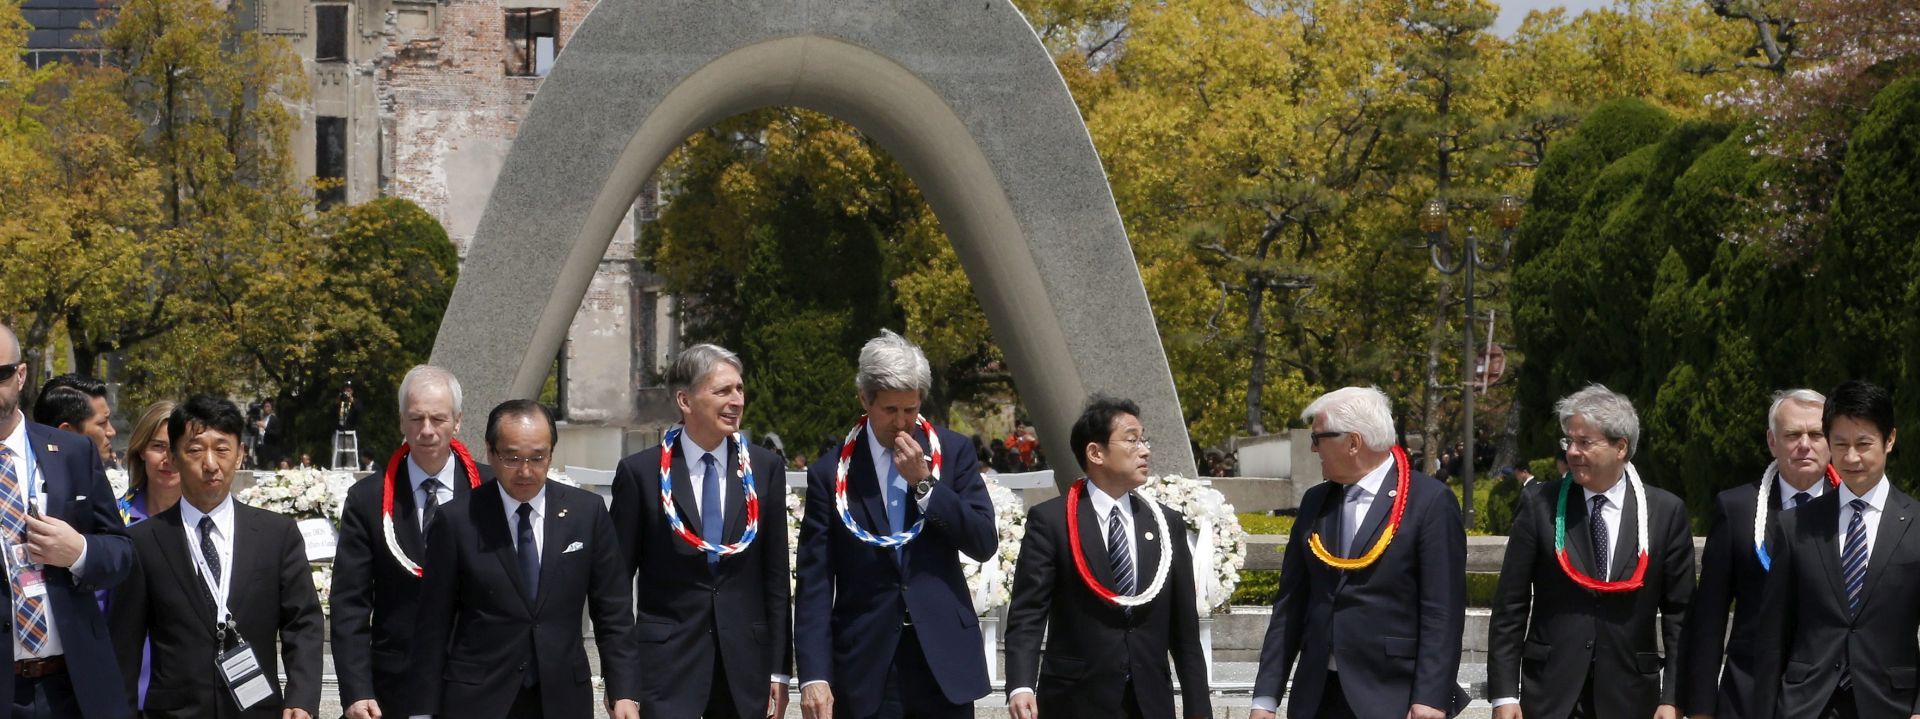 epa05253834 US Secretary of State John Kerry (C), Mayor of Hiroshima Kazumi Matsui (4-L), Japanese Foreign Minister Fumio Kishida (5-R), German Foreign Minister Frank-Walter Steinmeier (4-R) and British Foreign and Commonwealth Minister Philip Hammond (5-L) wearing necklaces made of paper cranes in honor of Sadako Sazaki, the girl who became the symbol of atomic horror after dying of leukemia, after a wreath laying ceremony for the victims of the atomic bombing in 1945, at Hiroshima Peace Memorial Park, in Hiroshima, Hiroshima Prefecture, western Japan, 11 April 2016. The Group of Seven (G7) countries' foreign ministers gathered to talk about various themes including nuclear disarmament and non-proliferation in the atomic bombing city of Hiroshima. In picture Italian Foreign Minister Paolo Gentiloni (3-R) and French Foreign Minister Jean-Marc Ayrault (2-R).  EPA/KIMIMASA MAYAMA